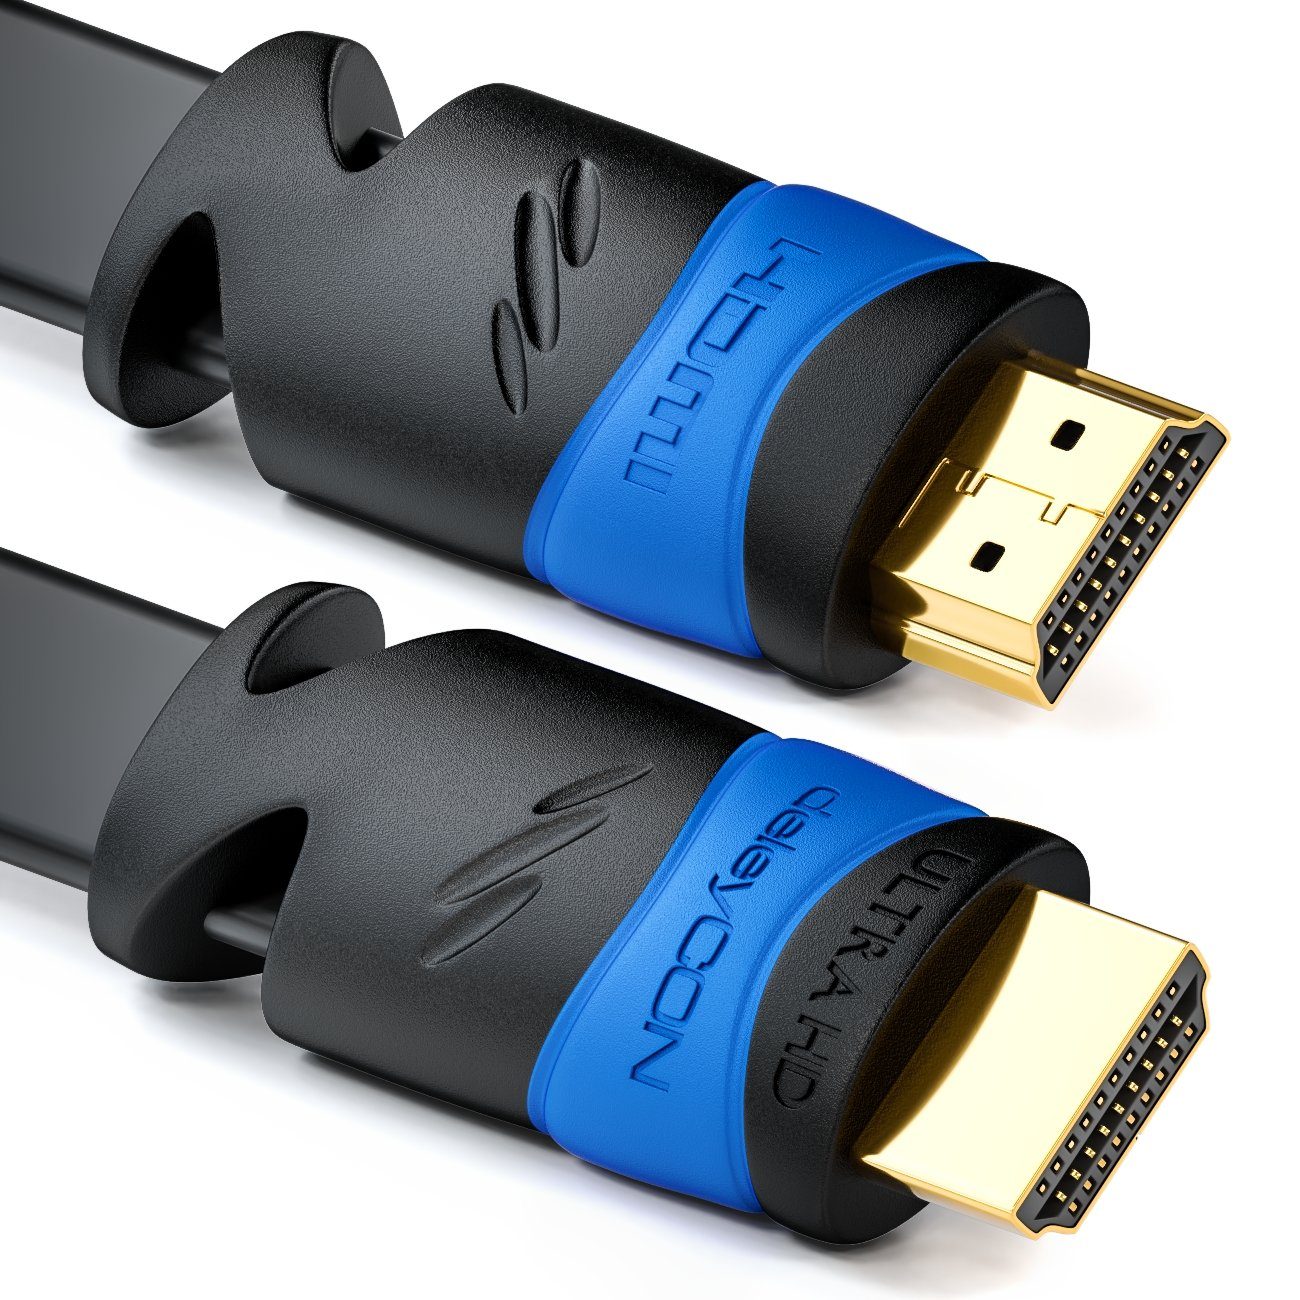 deleyCON deleyCON 3m Flaches HDMI Kabel UHD 4K HDR 3D 1080p 2160p ARC Full HD HDMI-Kabel